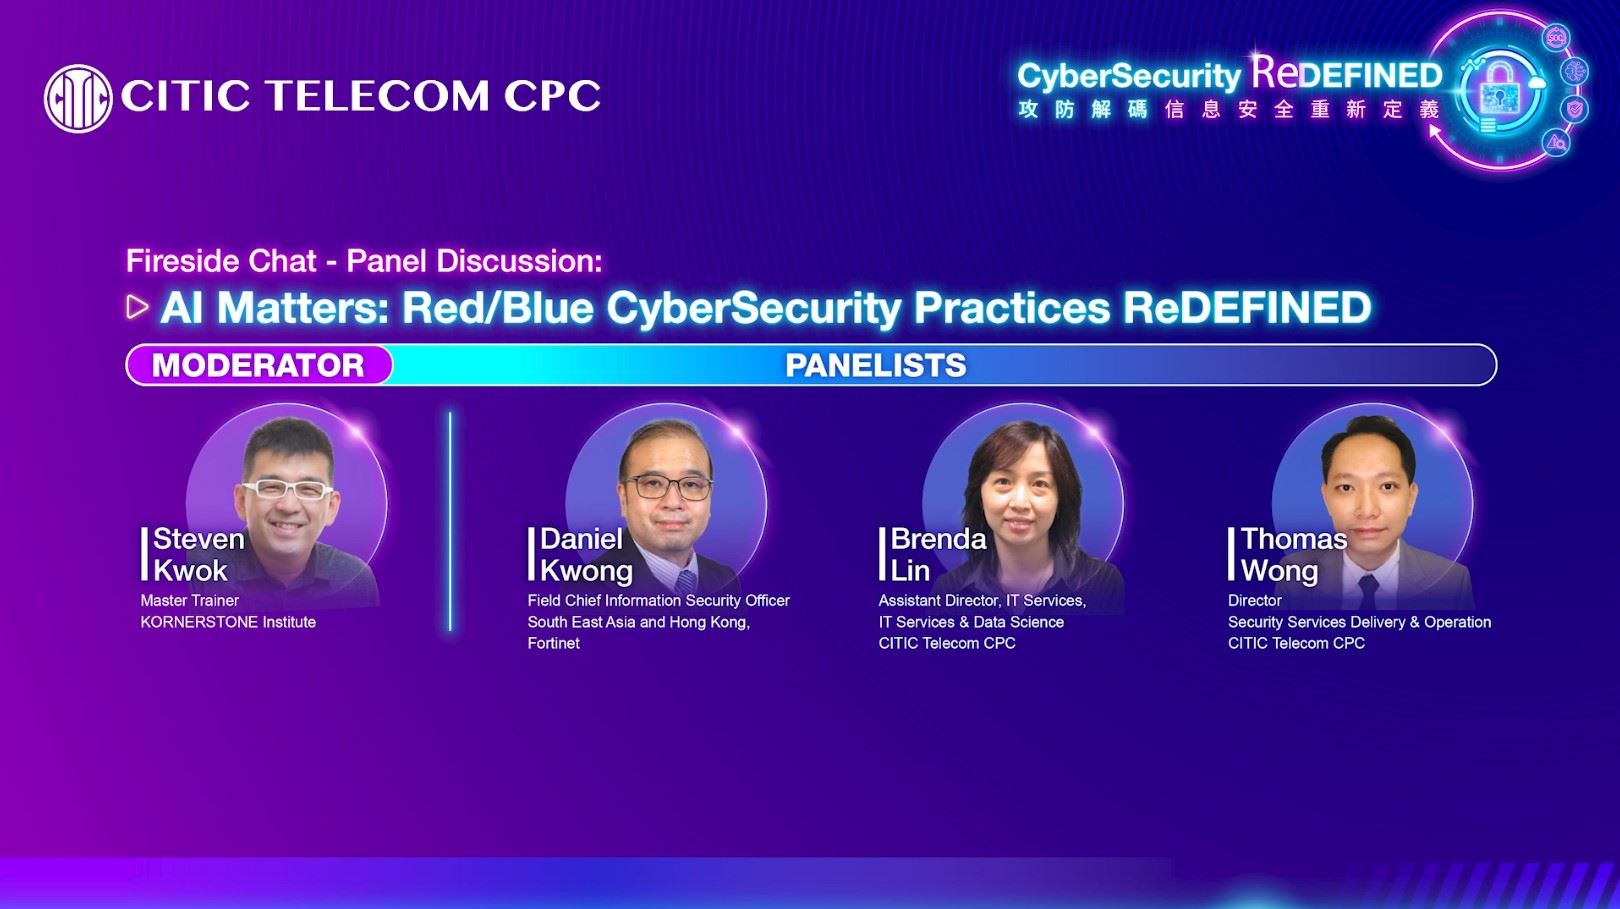 【CyberSecurity ReDEFINED 信息安全大會 | 活動精華】Fireside Chat: Panel 1 Discussion